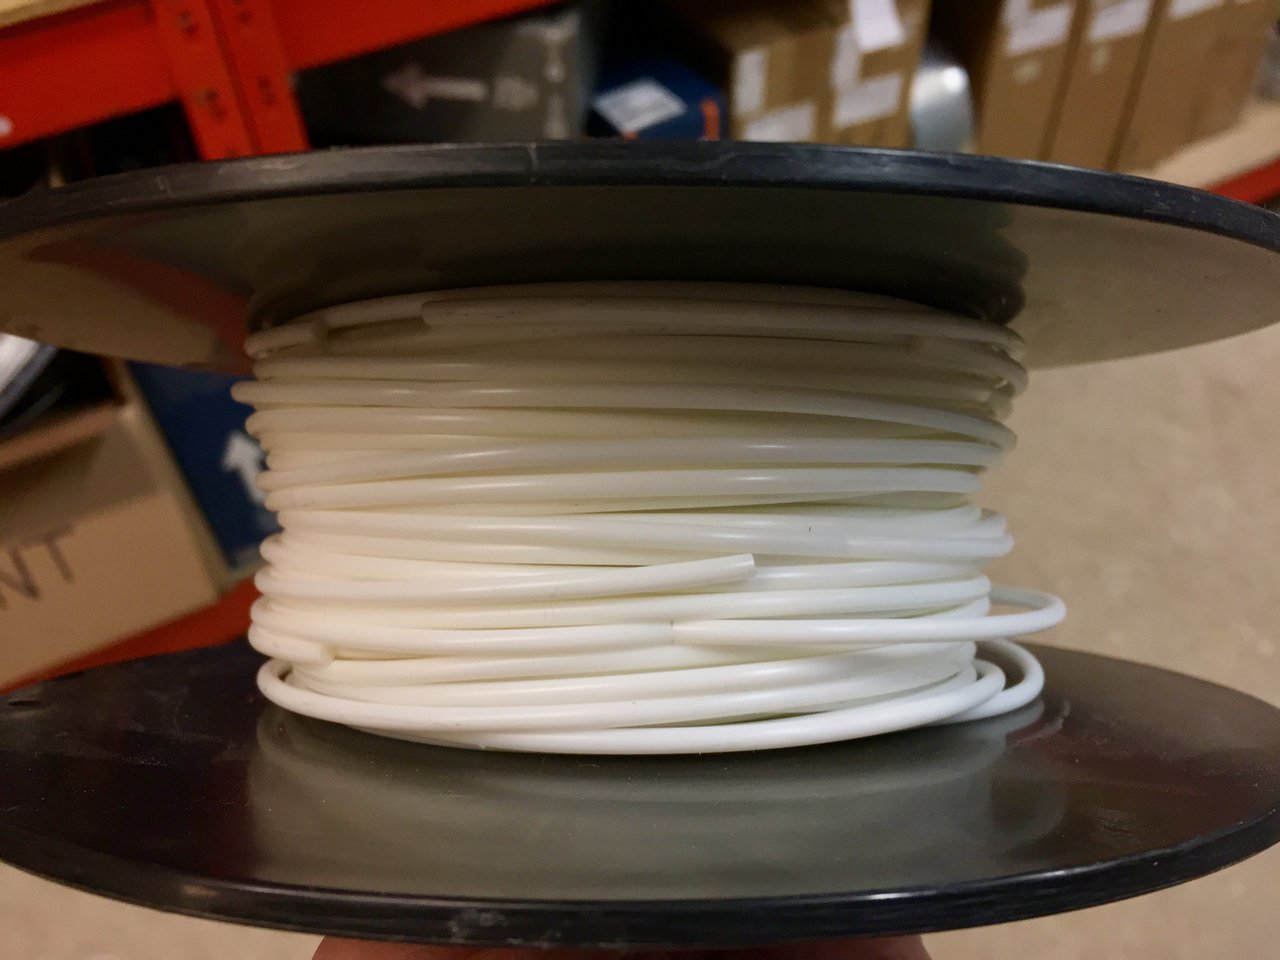  The remainder of the exploded filament spool, showing multiple breaks 